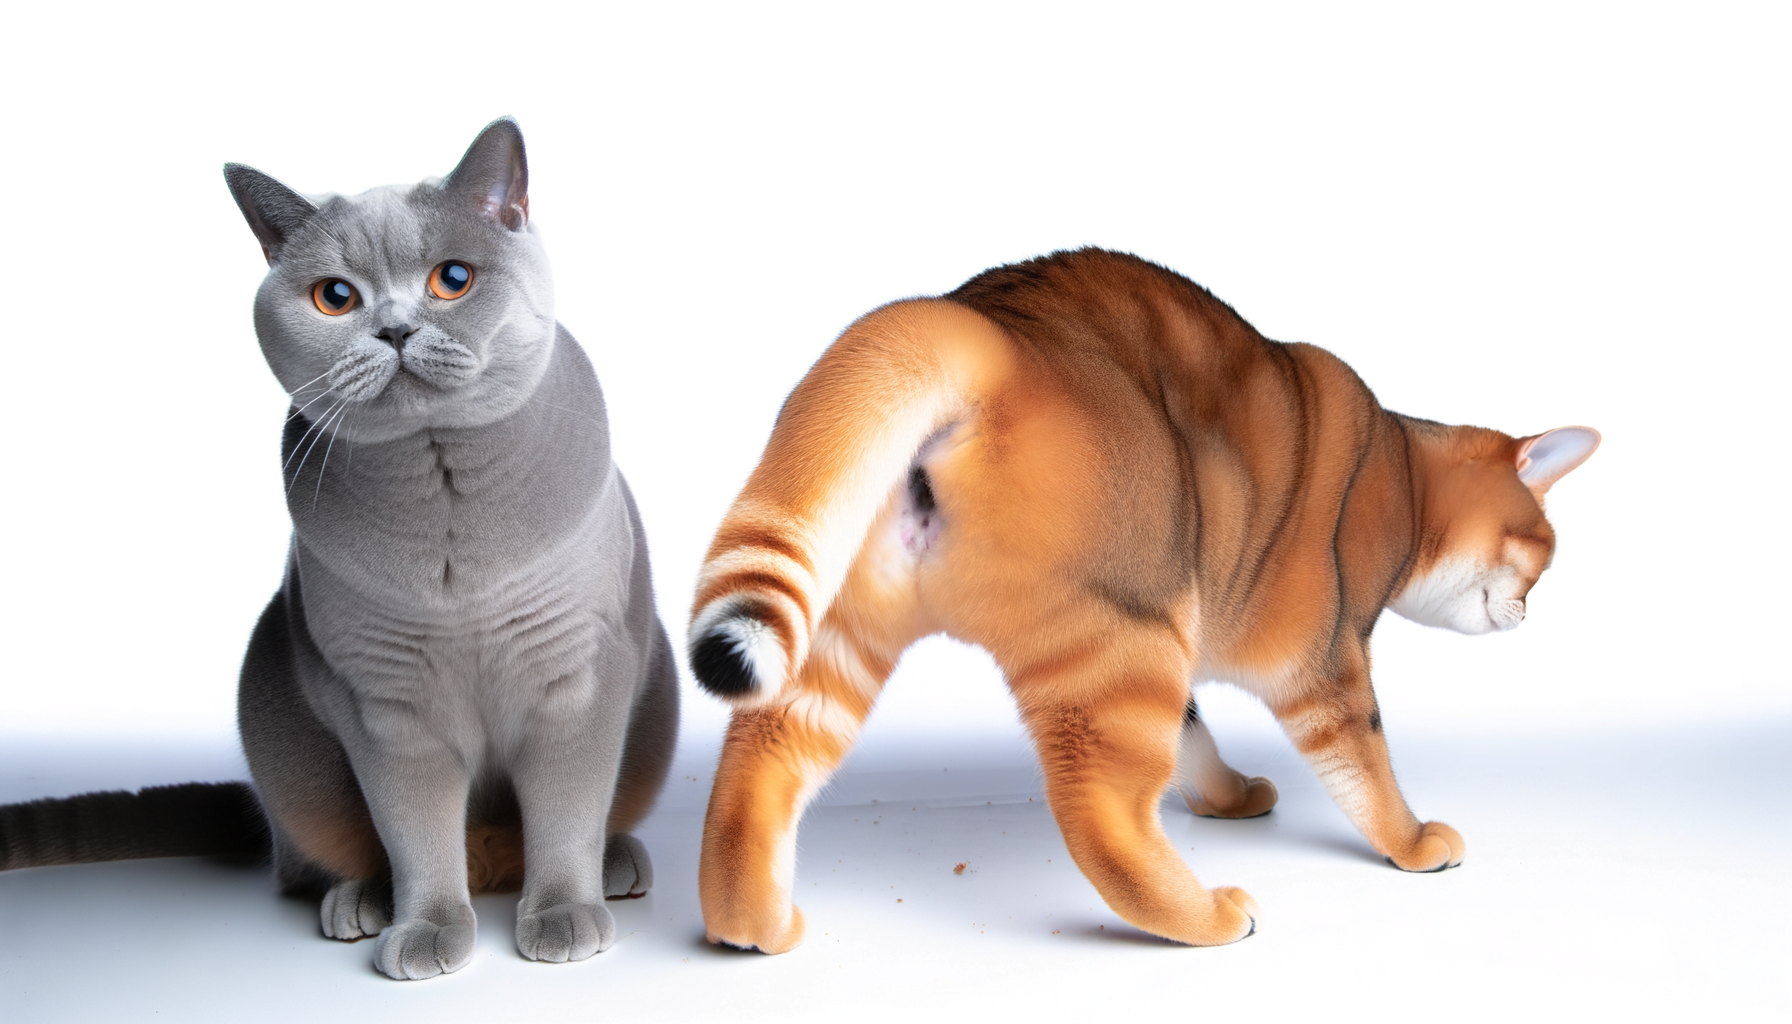 "Decoding Feline Behavior: The Science Behind Cats Sniffing Each Other's Butts"